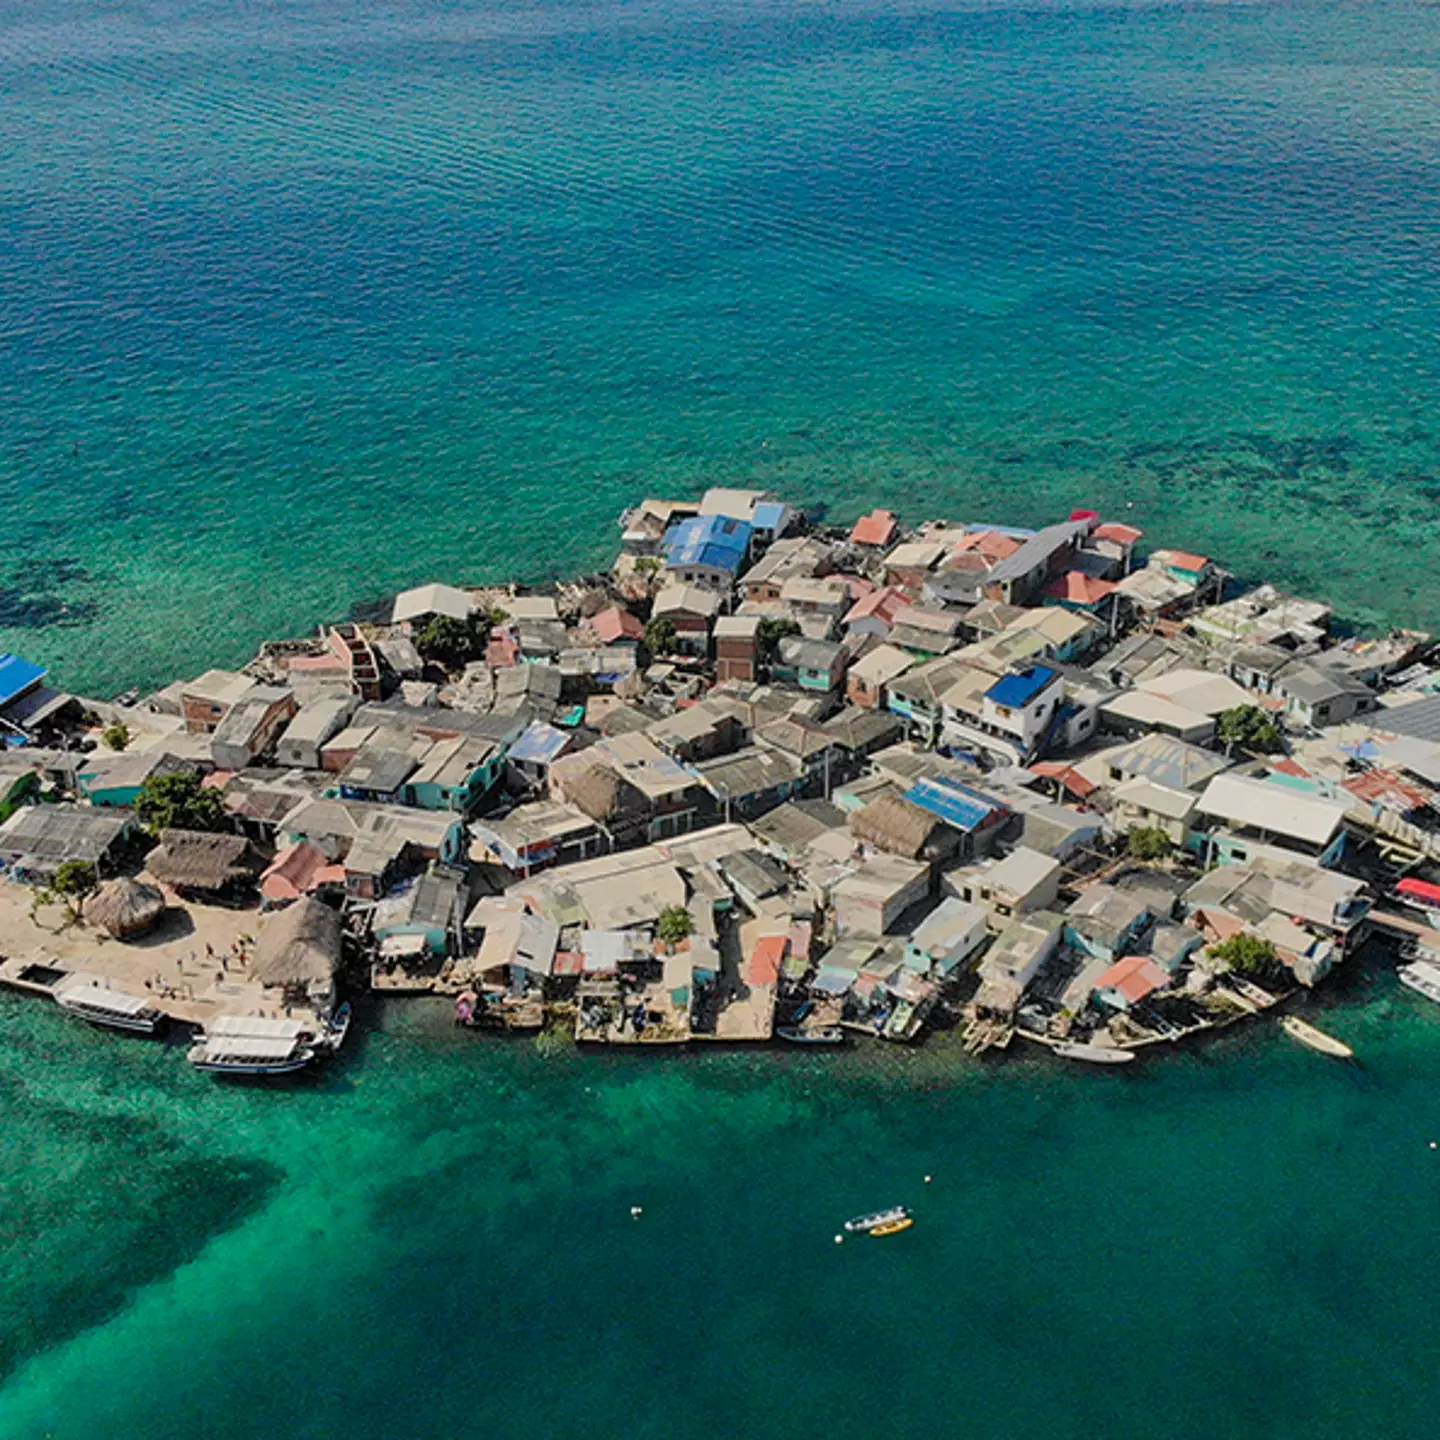 The ‘most crowded island on Earth’ where over 800 people live is only slightly bigger than a football field